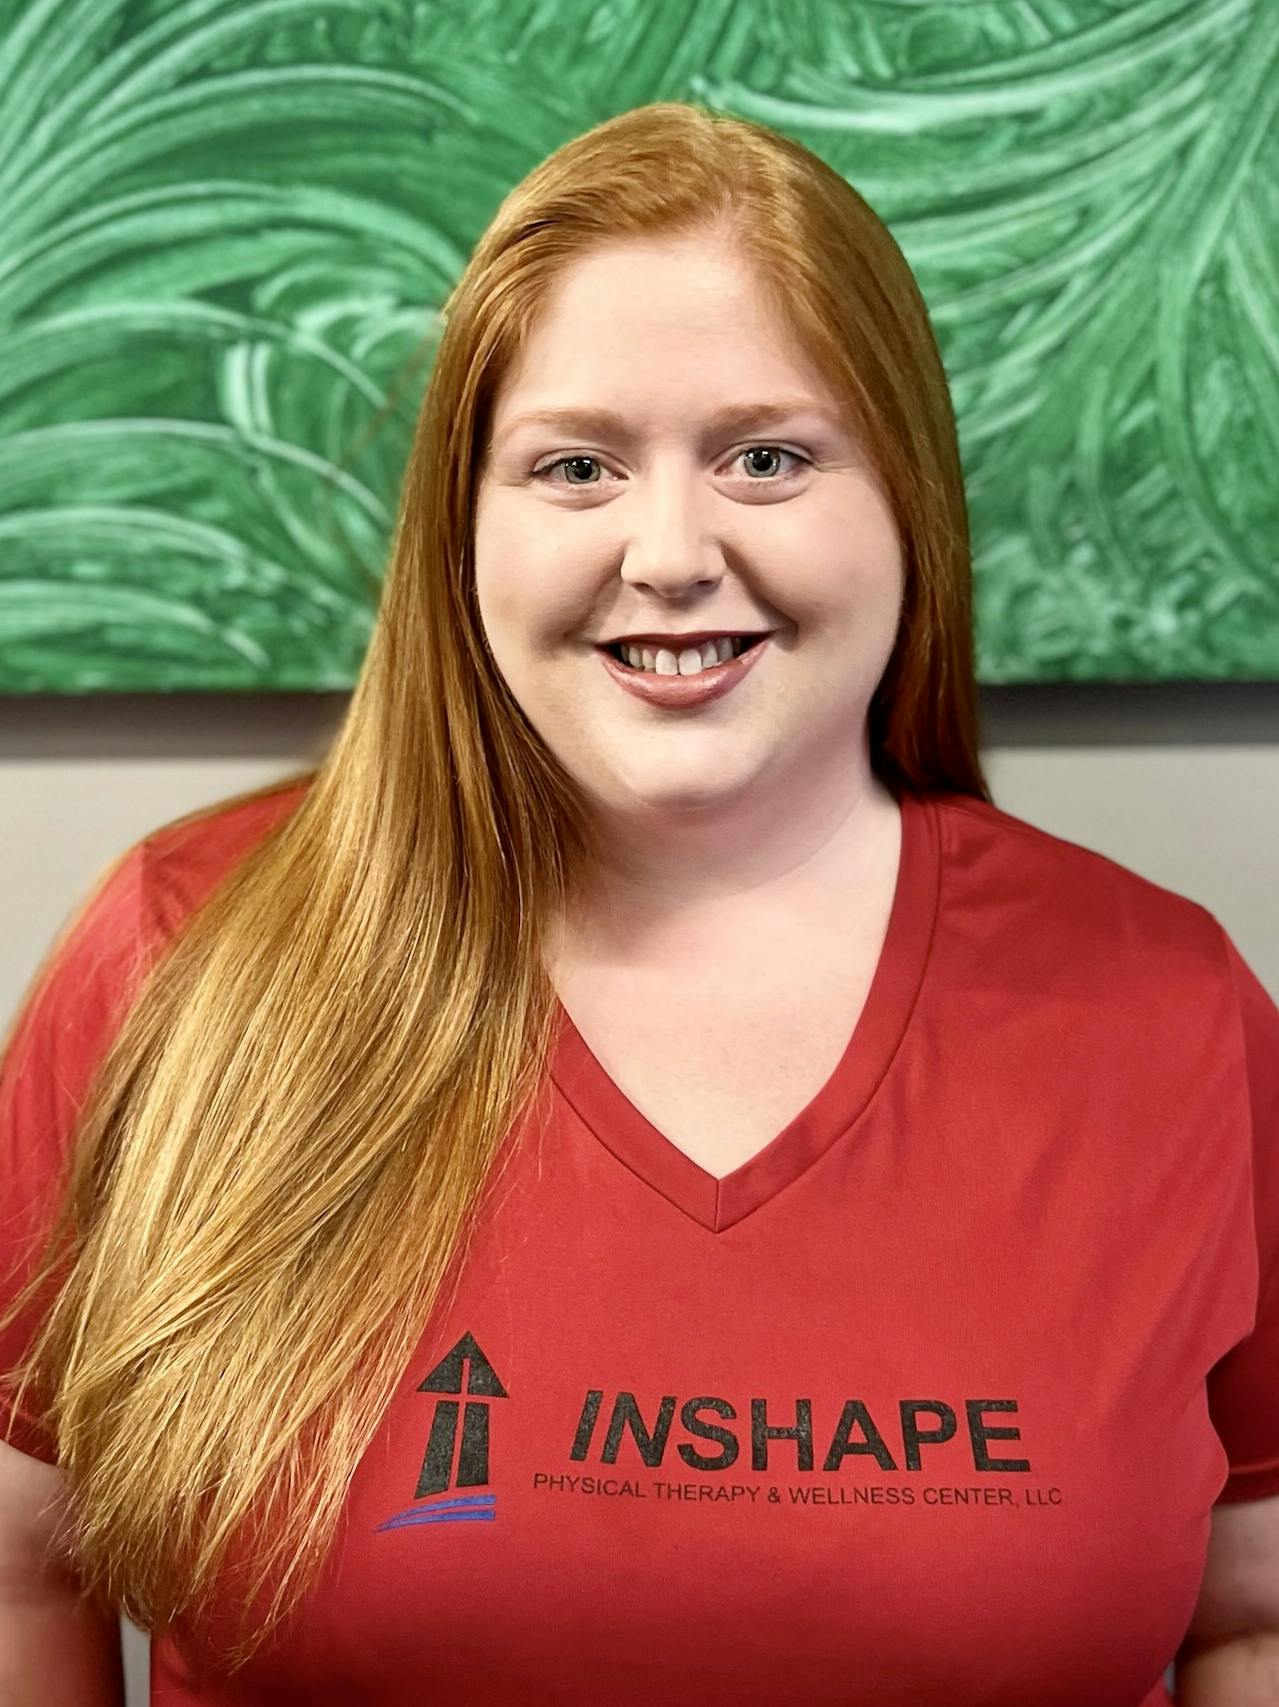 INSHAPE Physical Therapy & Wellness Center | Amy Turner